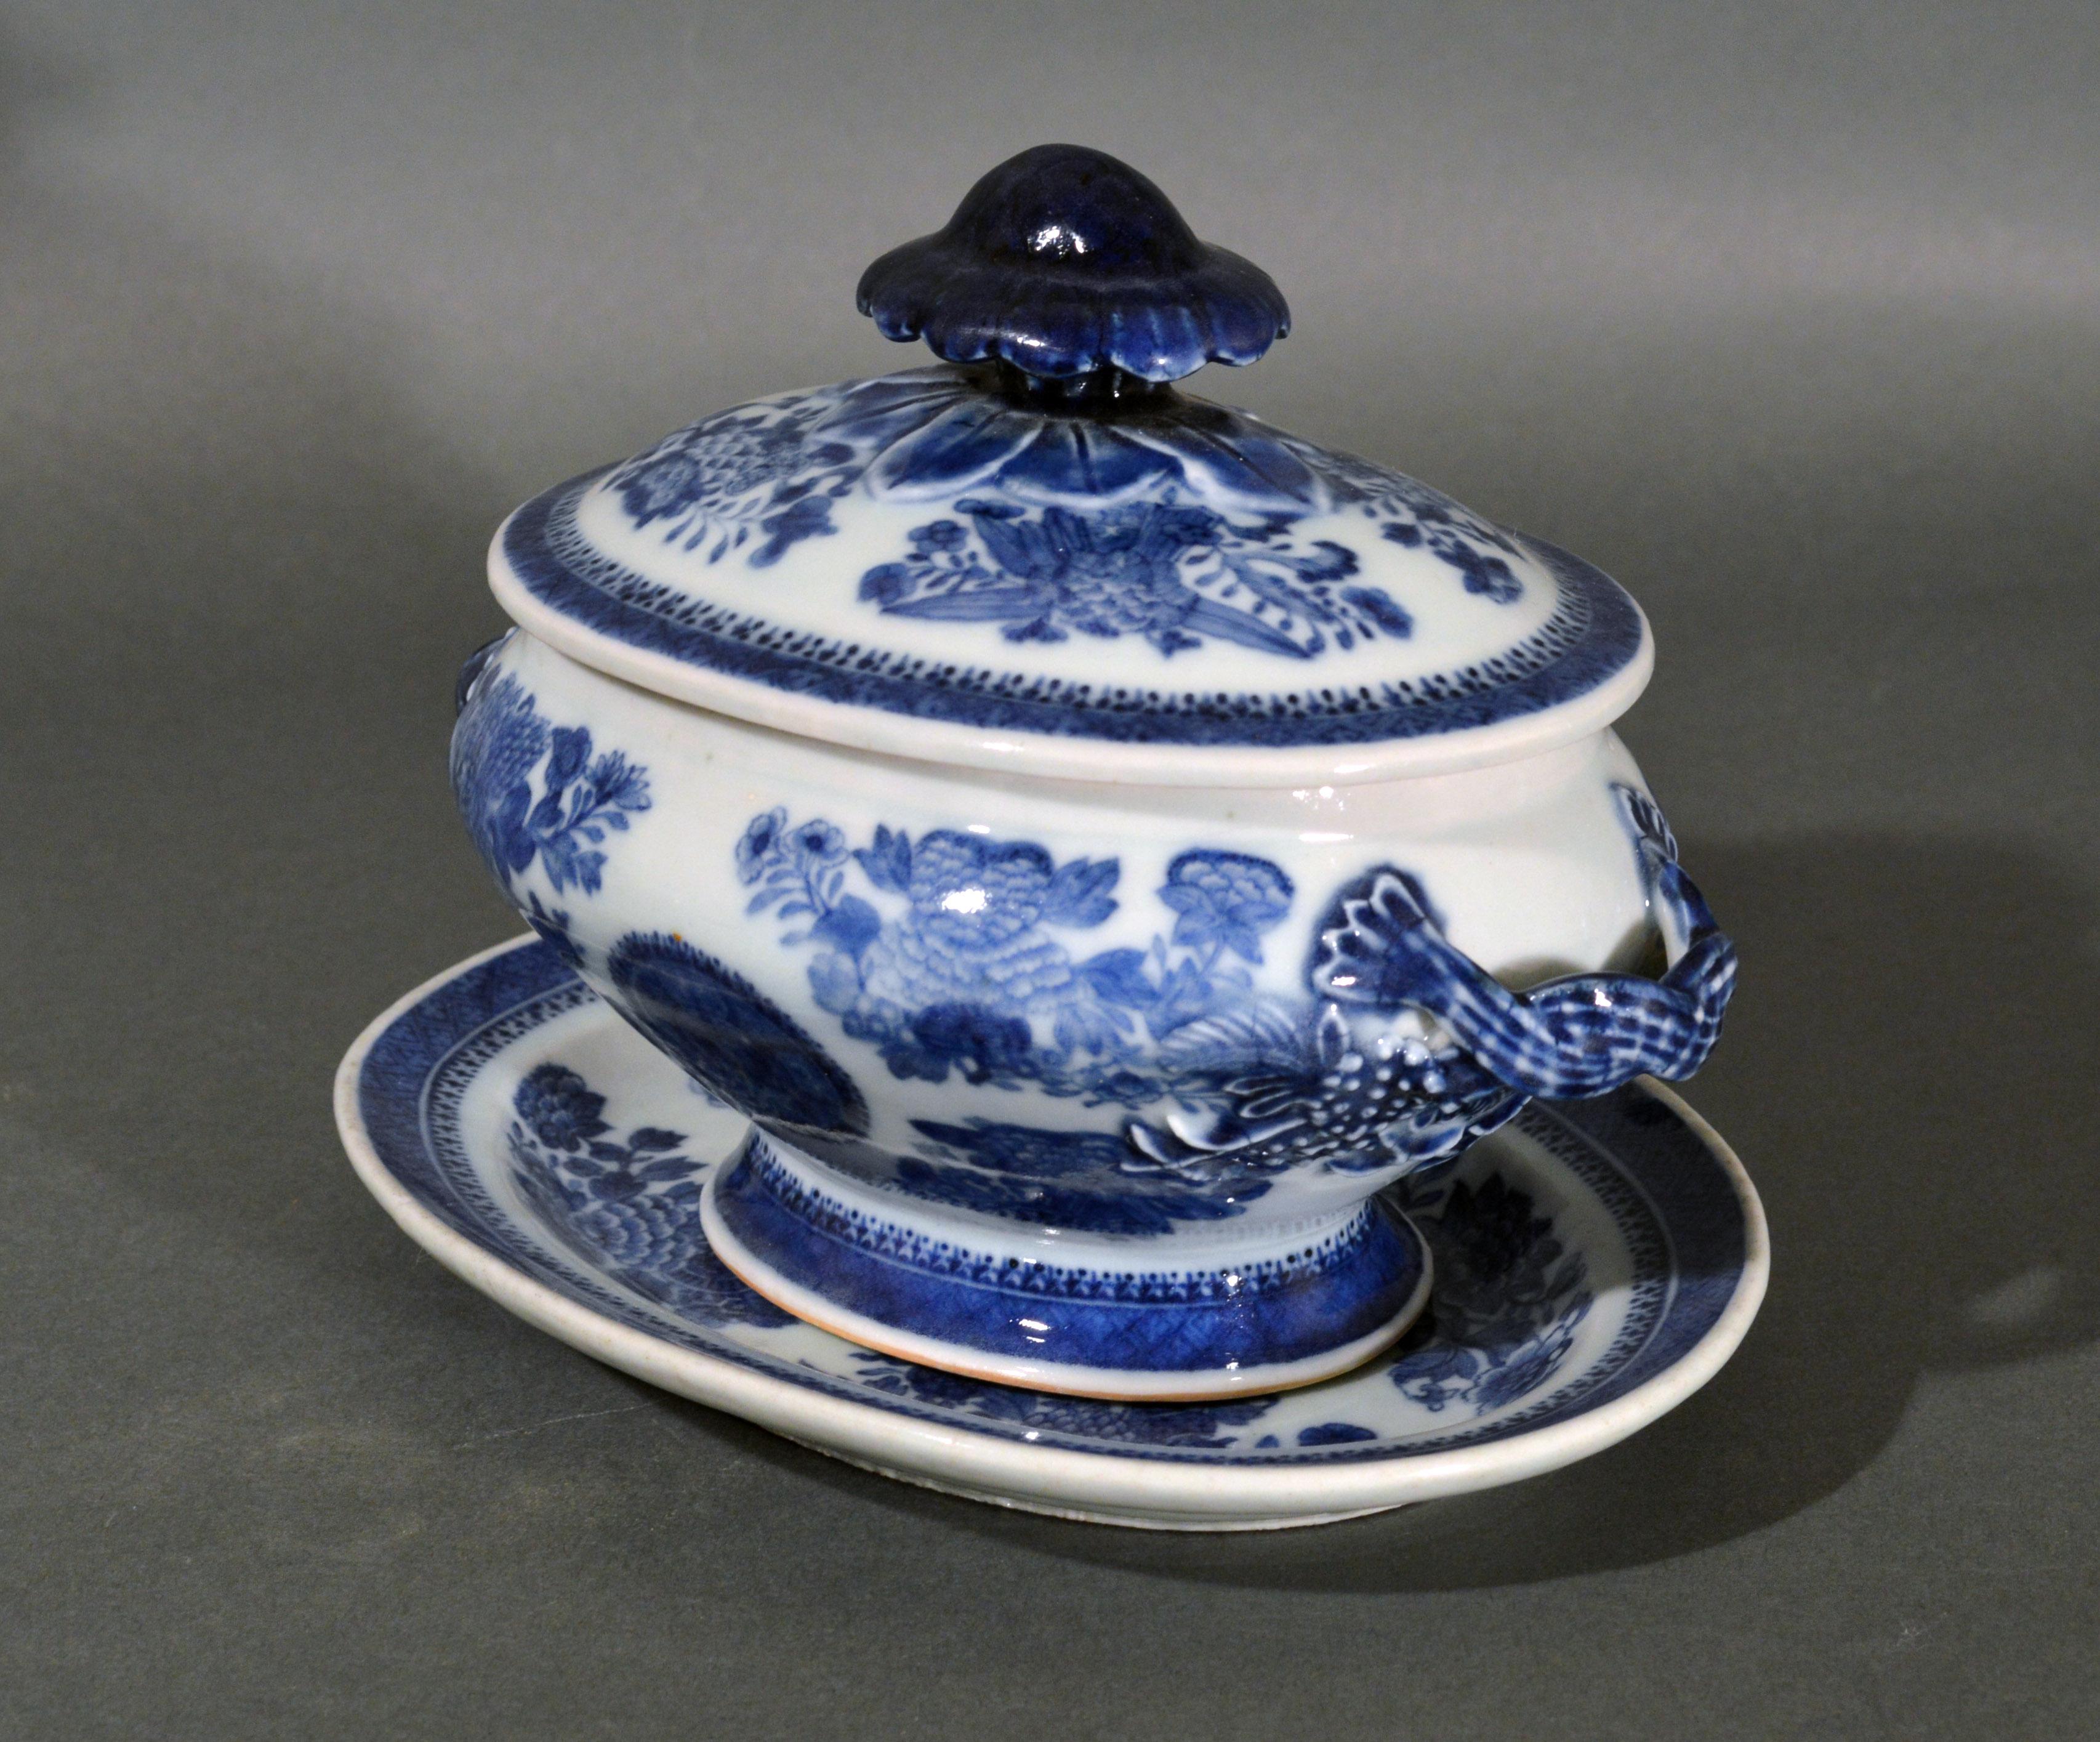 Chinese export porcelain blue fitzhugh sauce tureens, covers and stands,
circa 1780-1810

The pair of Chinese export porcelain sauce tureens, covers and under dishes are painted in underglaze blue with the Fitzhugh pattern. The handles, with a